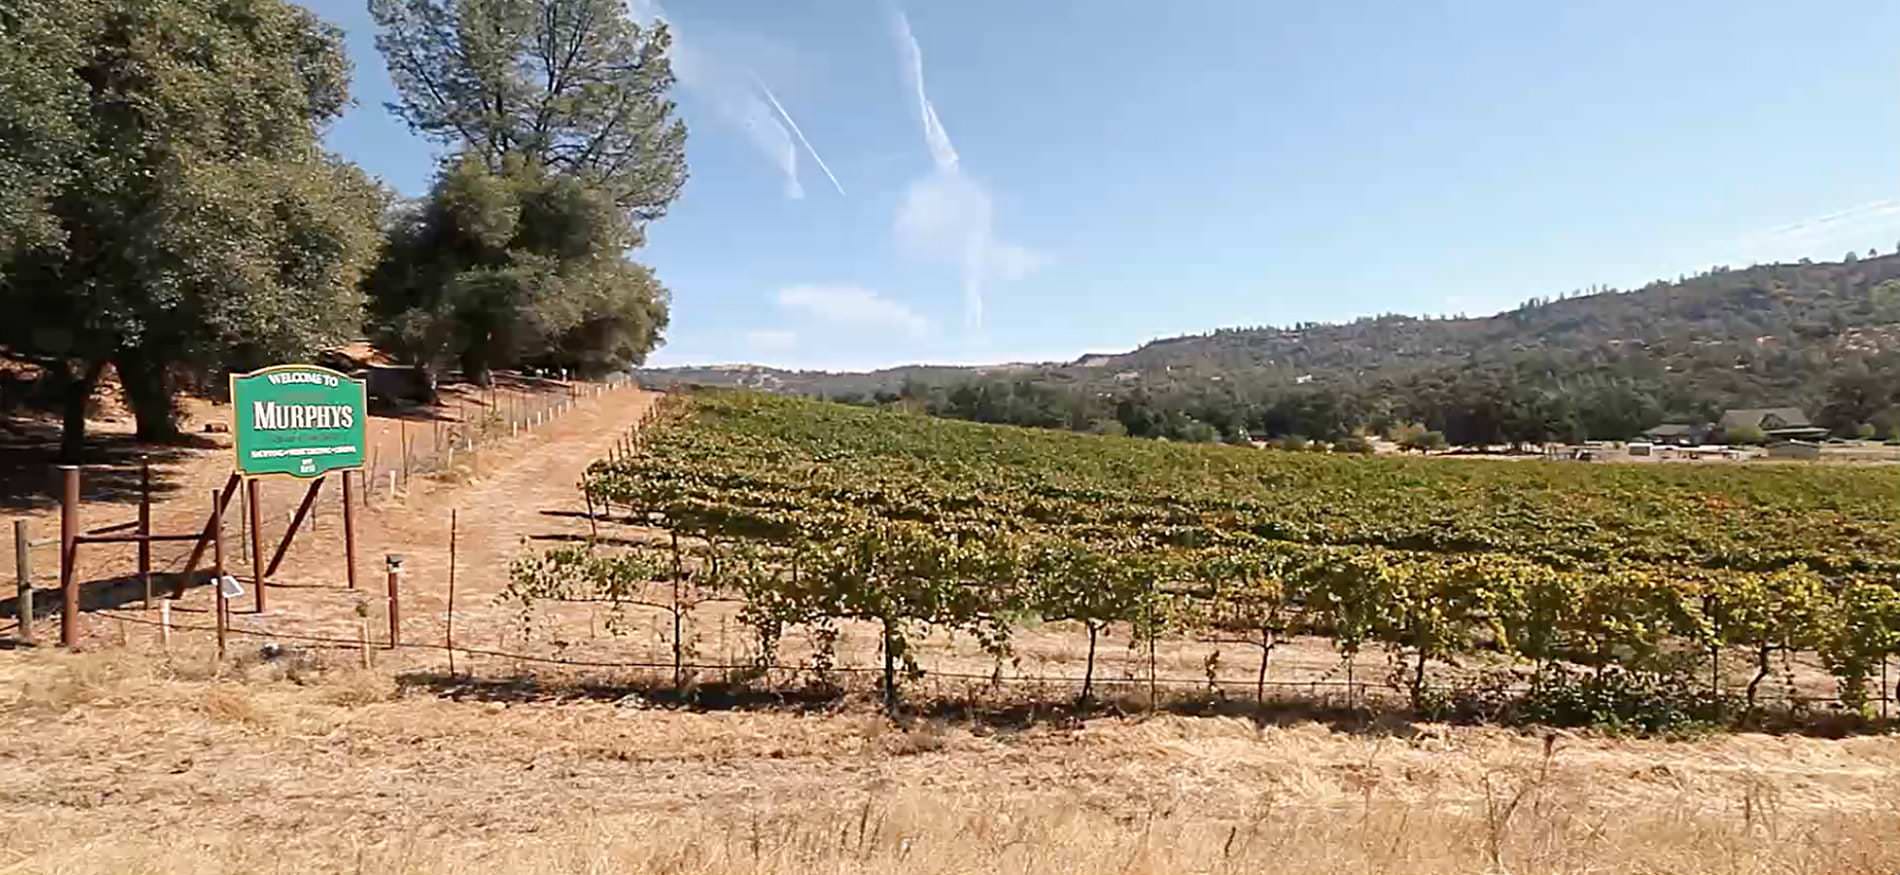 View of green vineyard surrounded by brown dirt and dried grass, green trees and blue skies